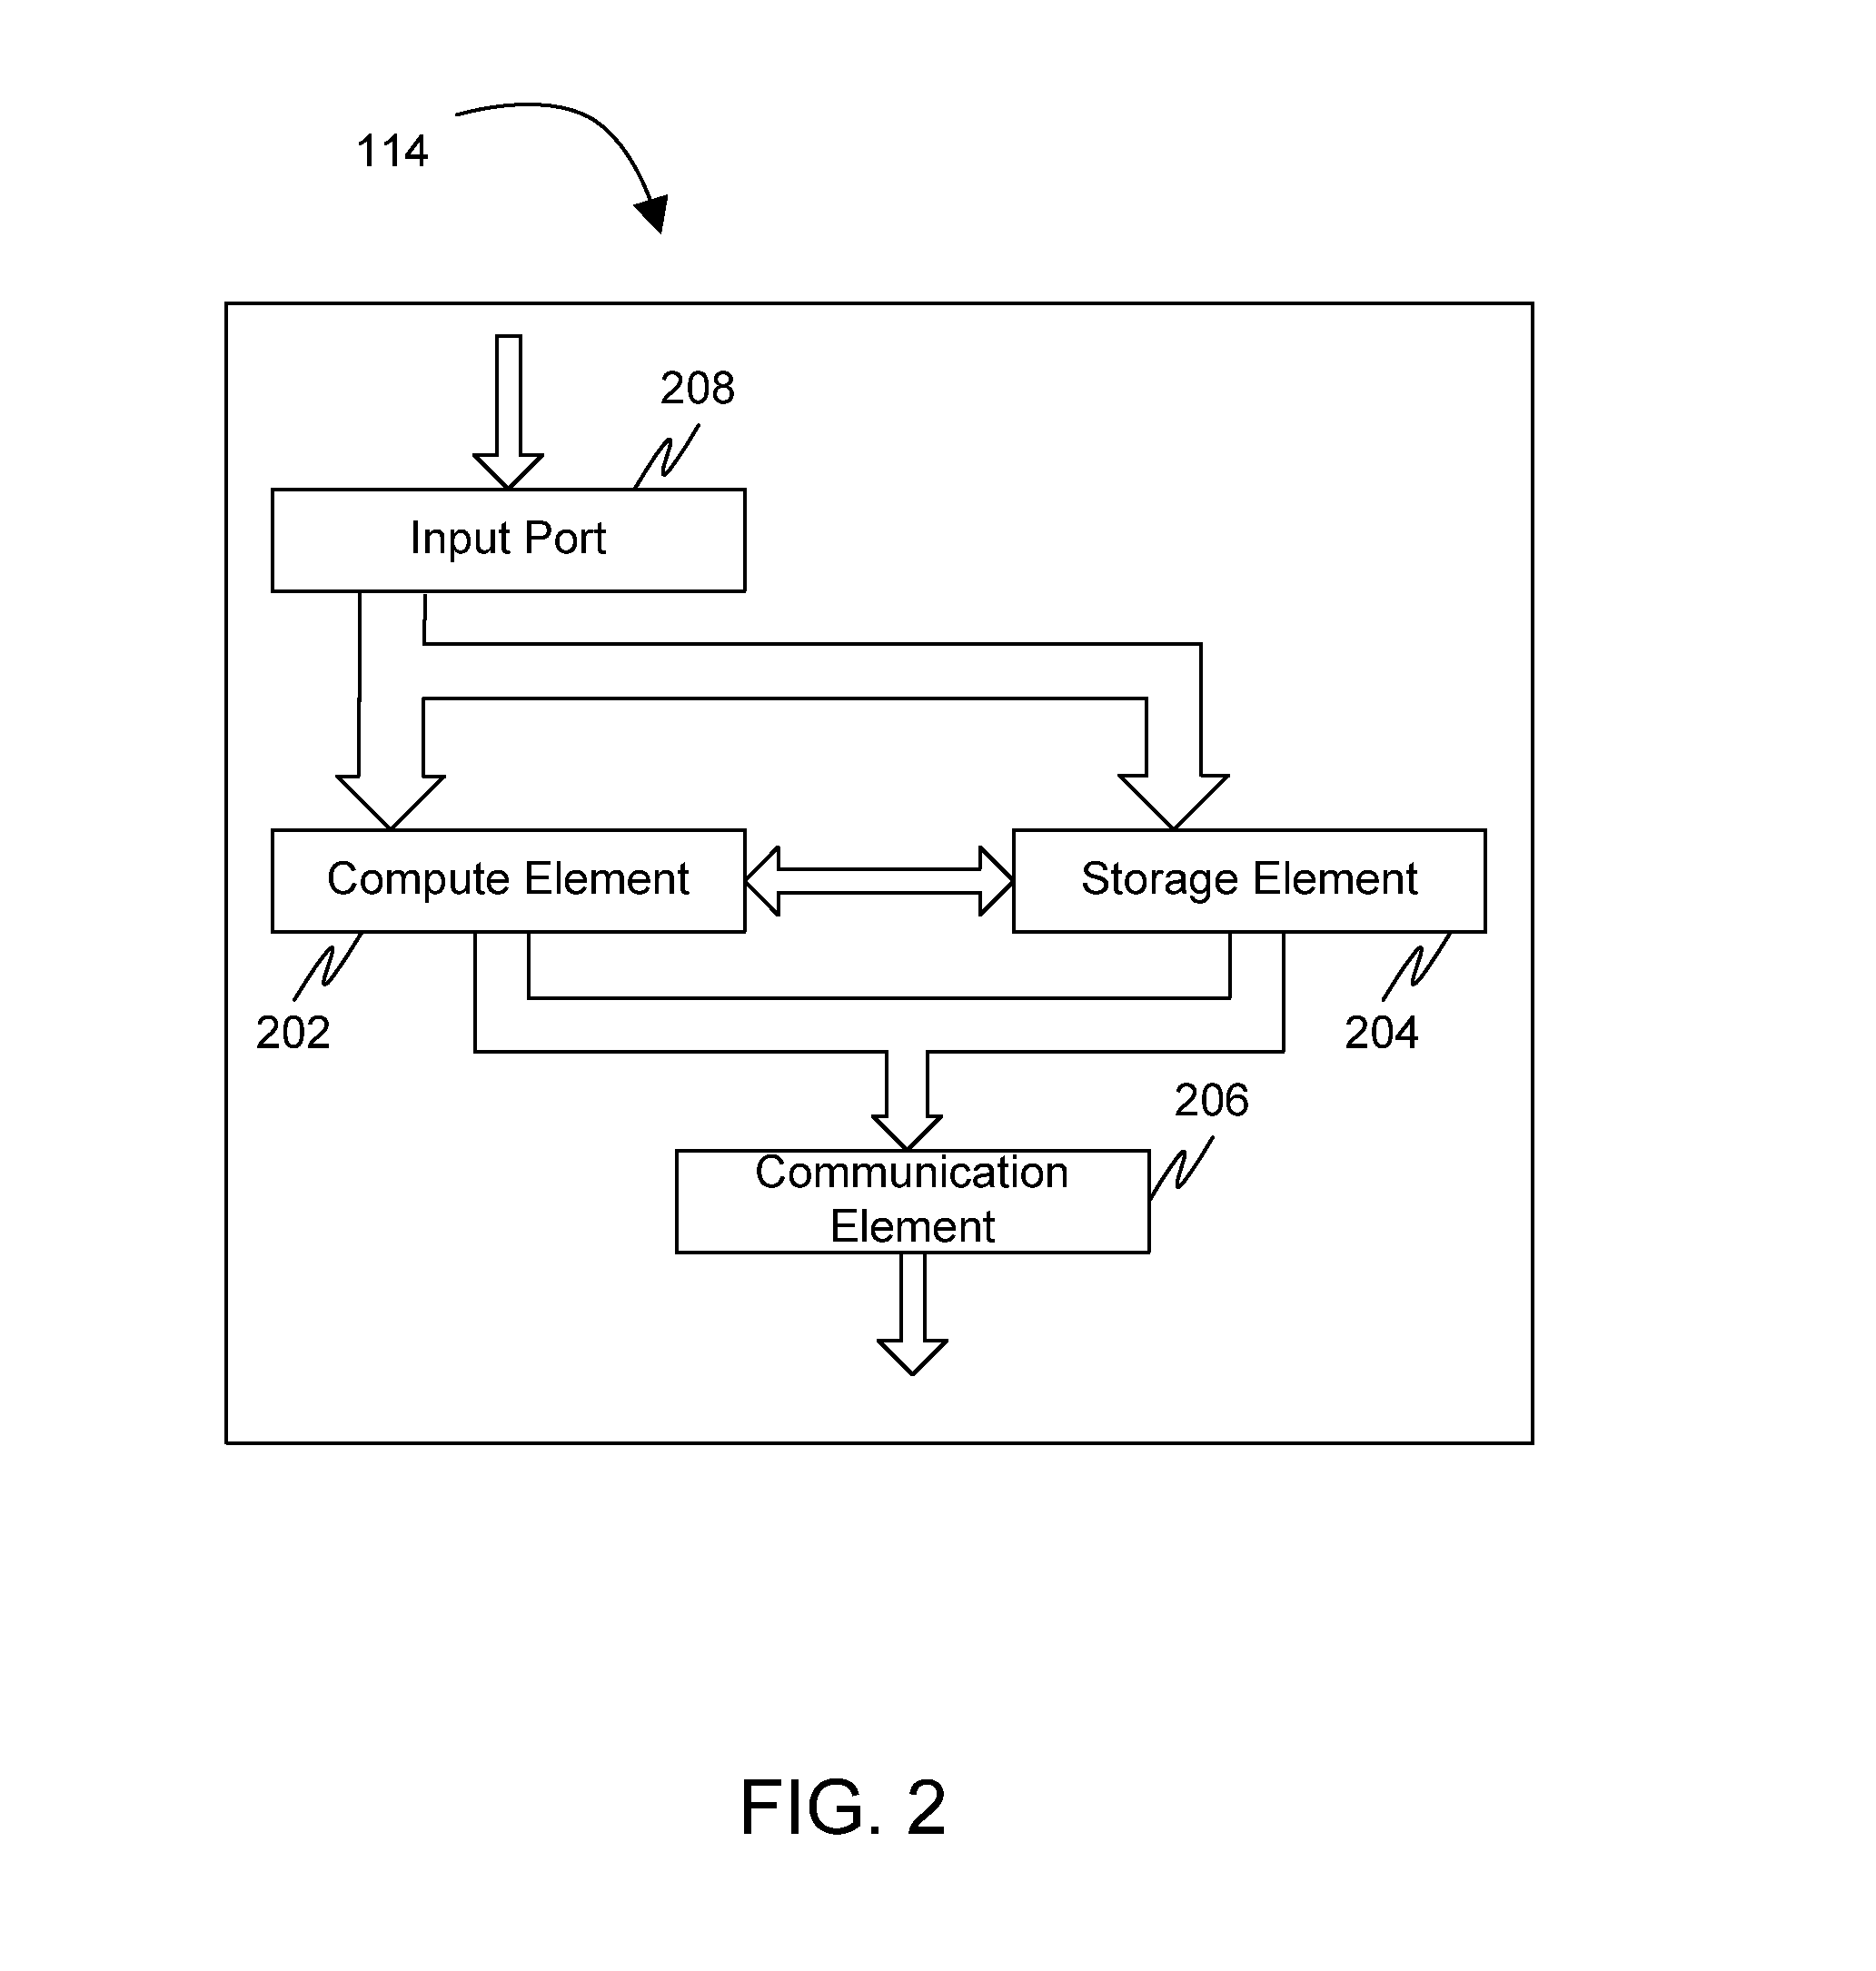 Method and System on Chip (SoC) for Adapting a Reconfigurable Hardware for an Application in Runtime